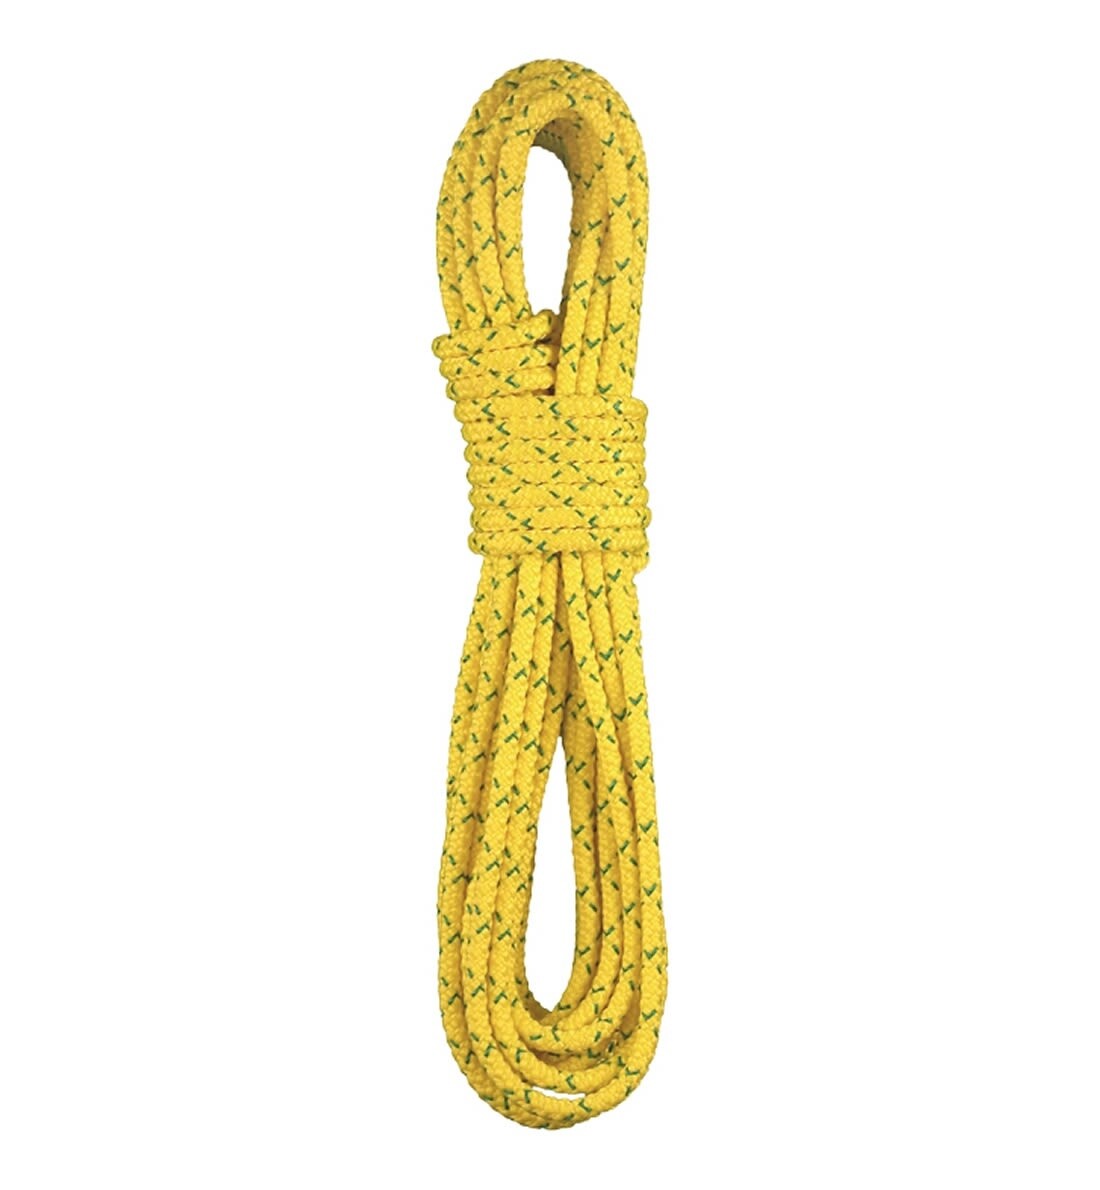 Sure-Grip River Rescue Rope with HMPE, Size: 9.5MM, Color: Yellow w/ Green Tracer, Quantity: foot